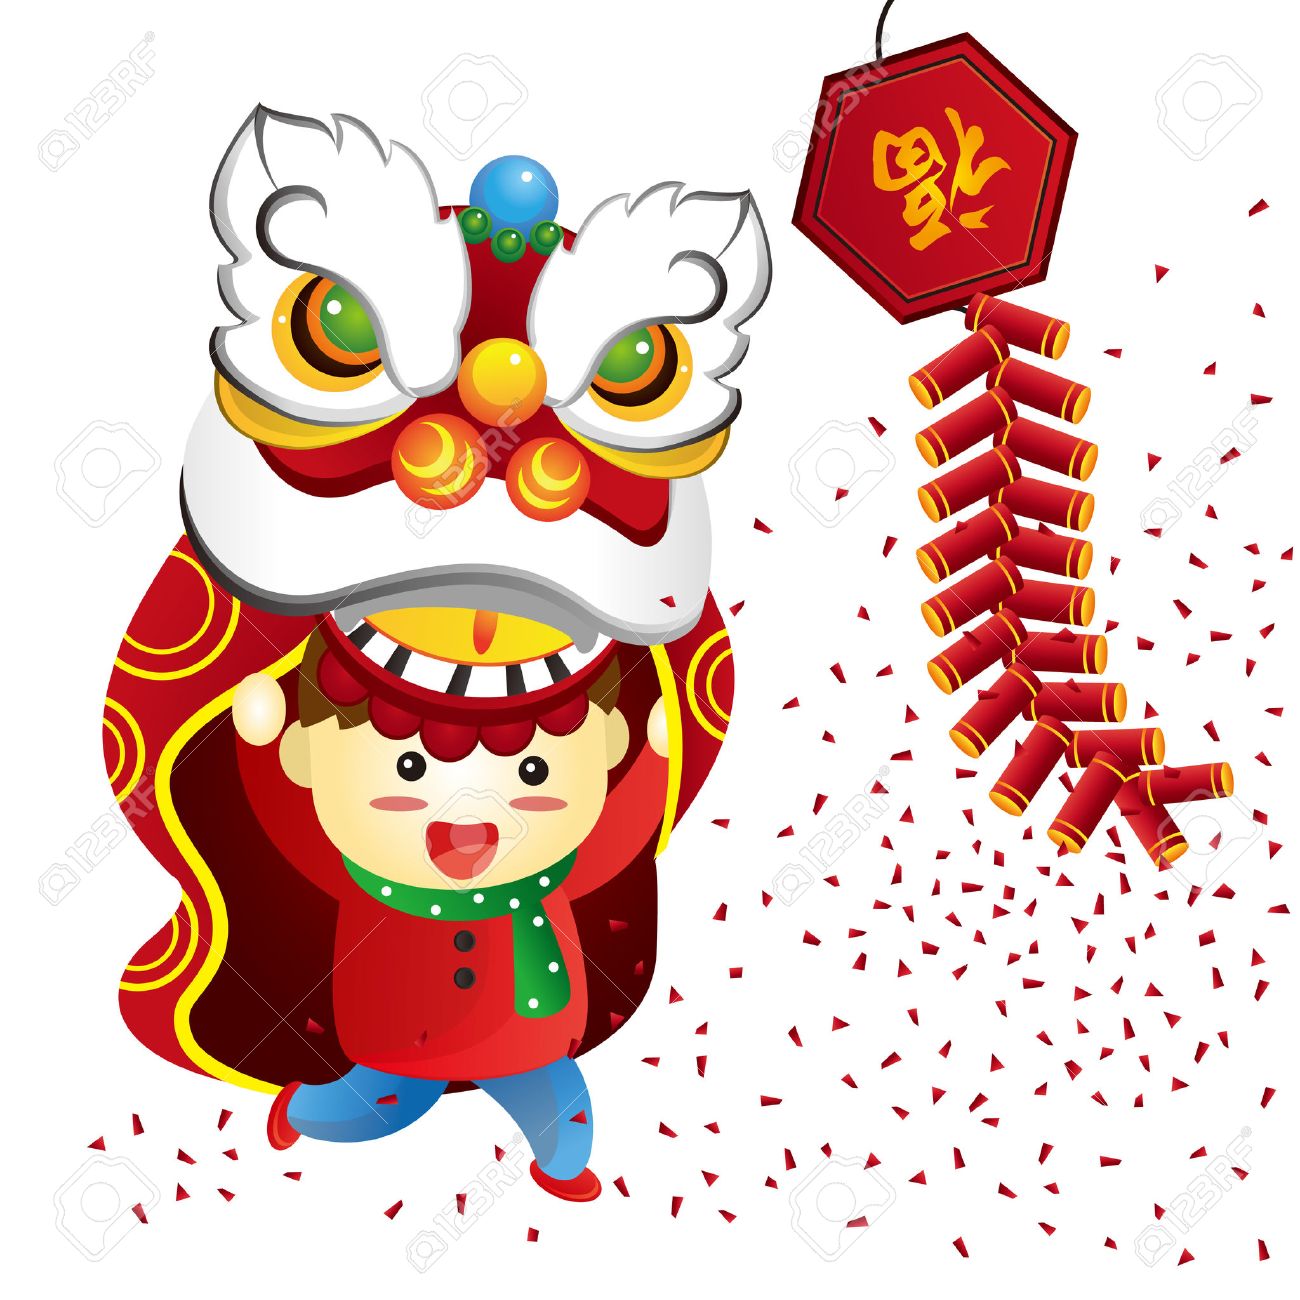 Chinese new year fireworks clipart 7 » Clipart Station.